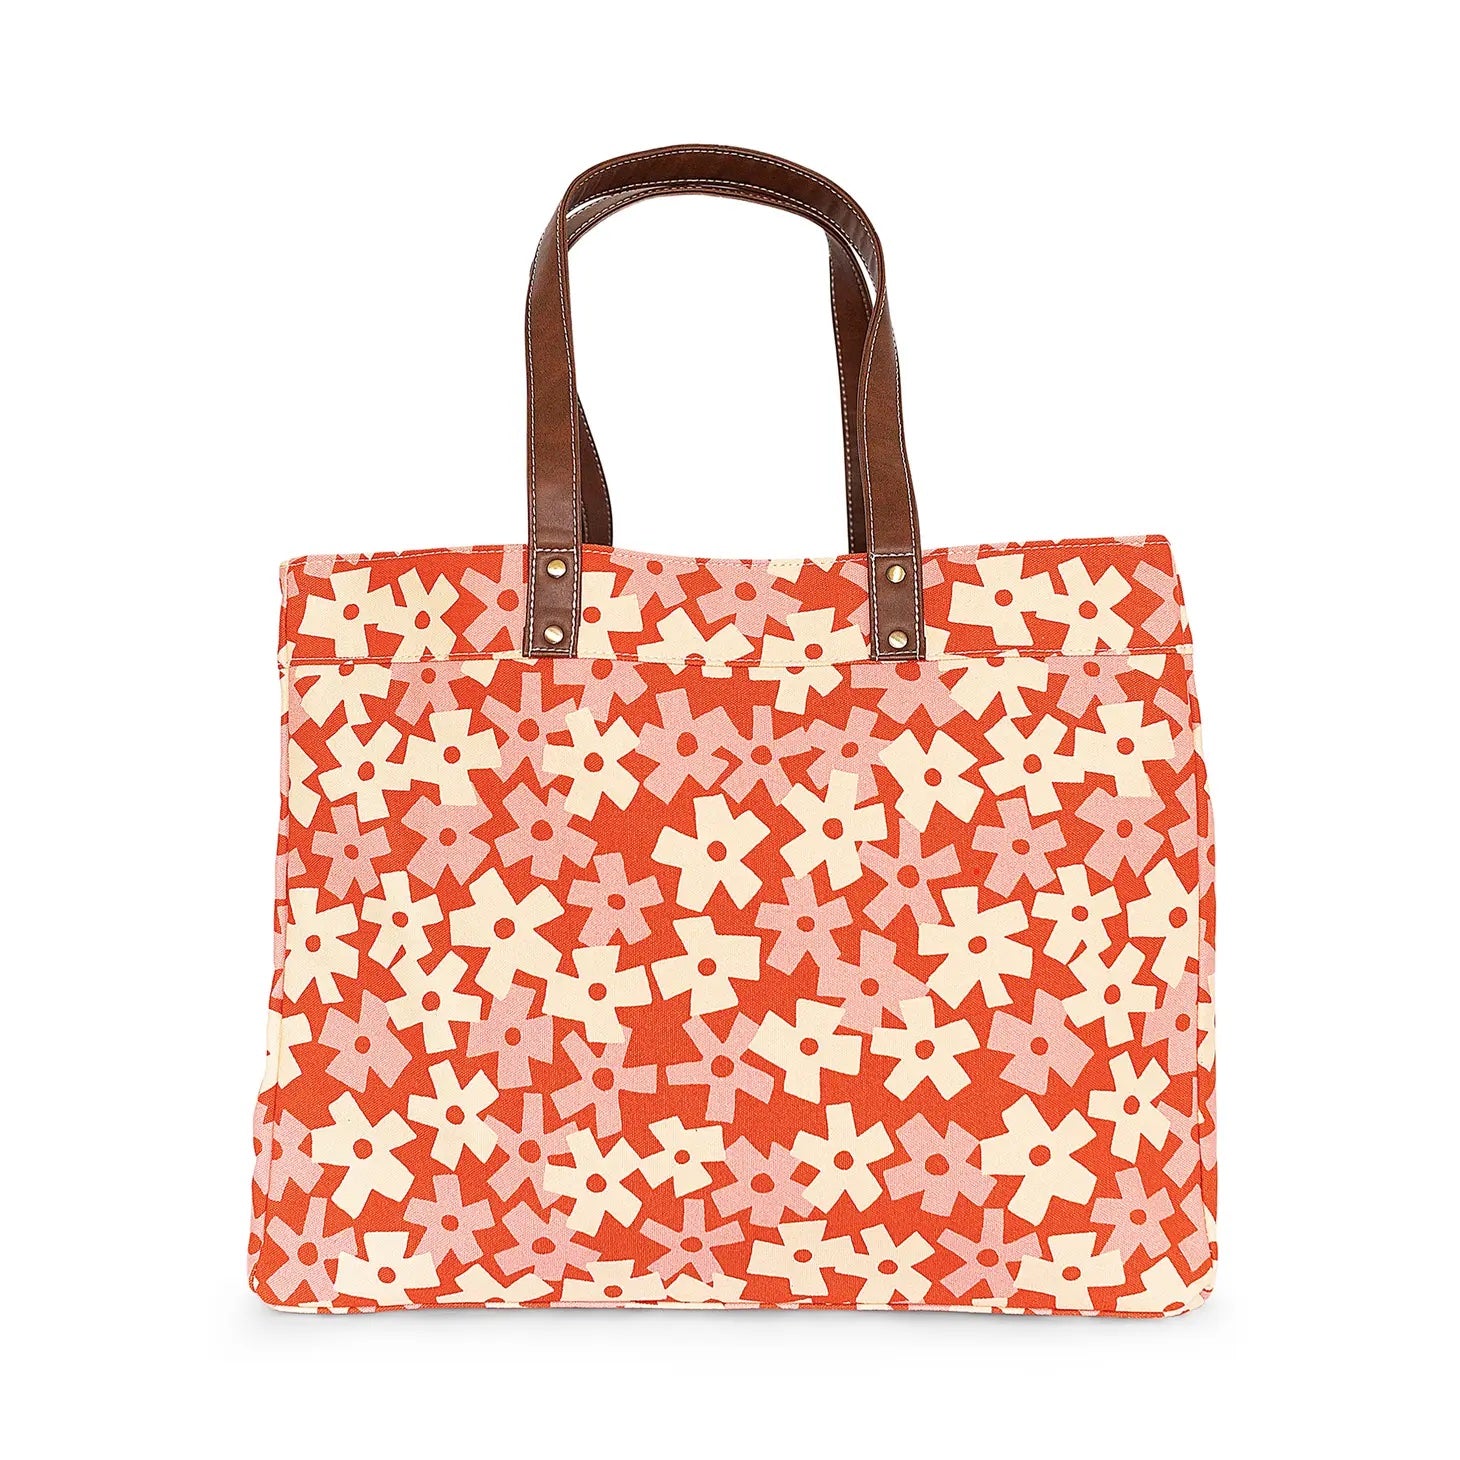 Solvang - Carryall Tote from Maika